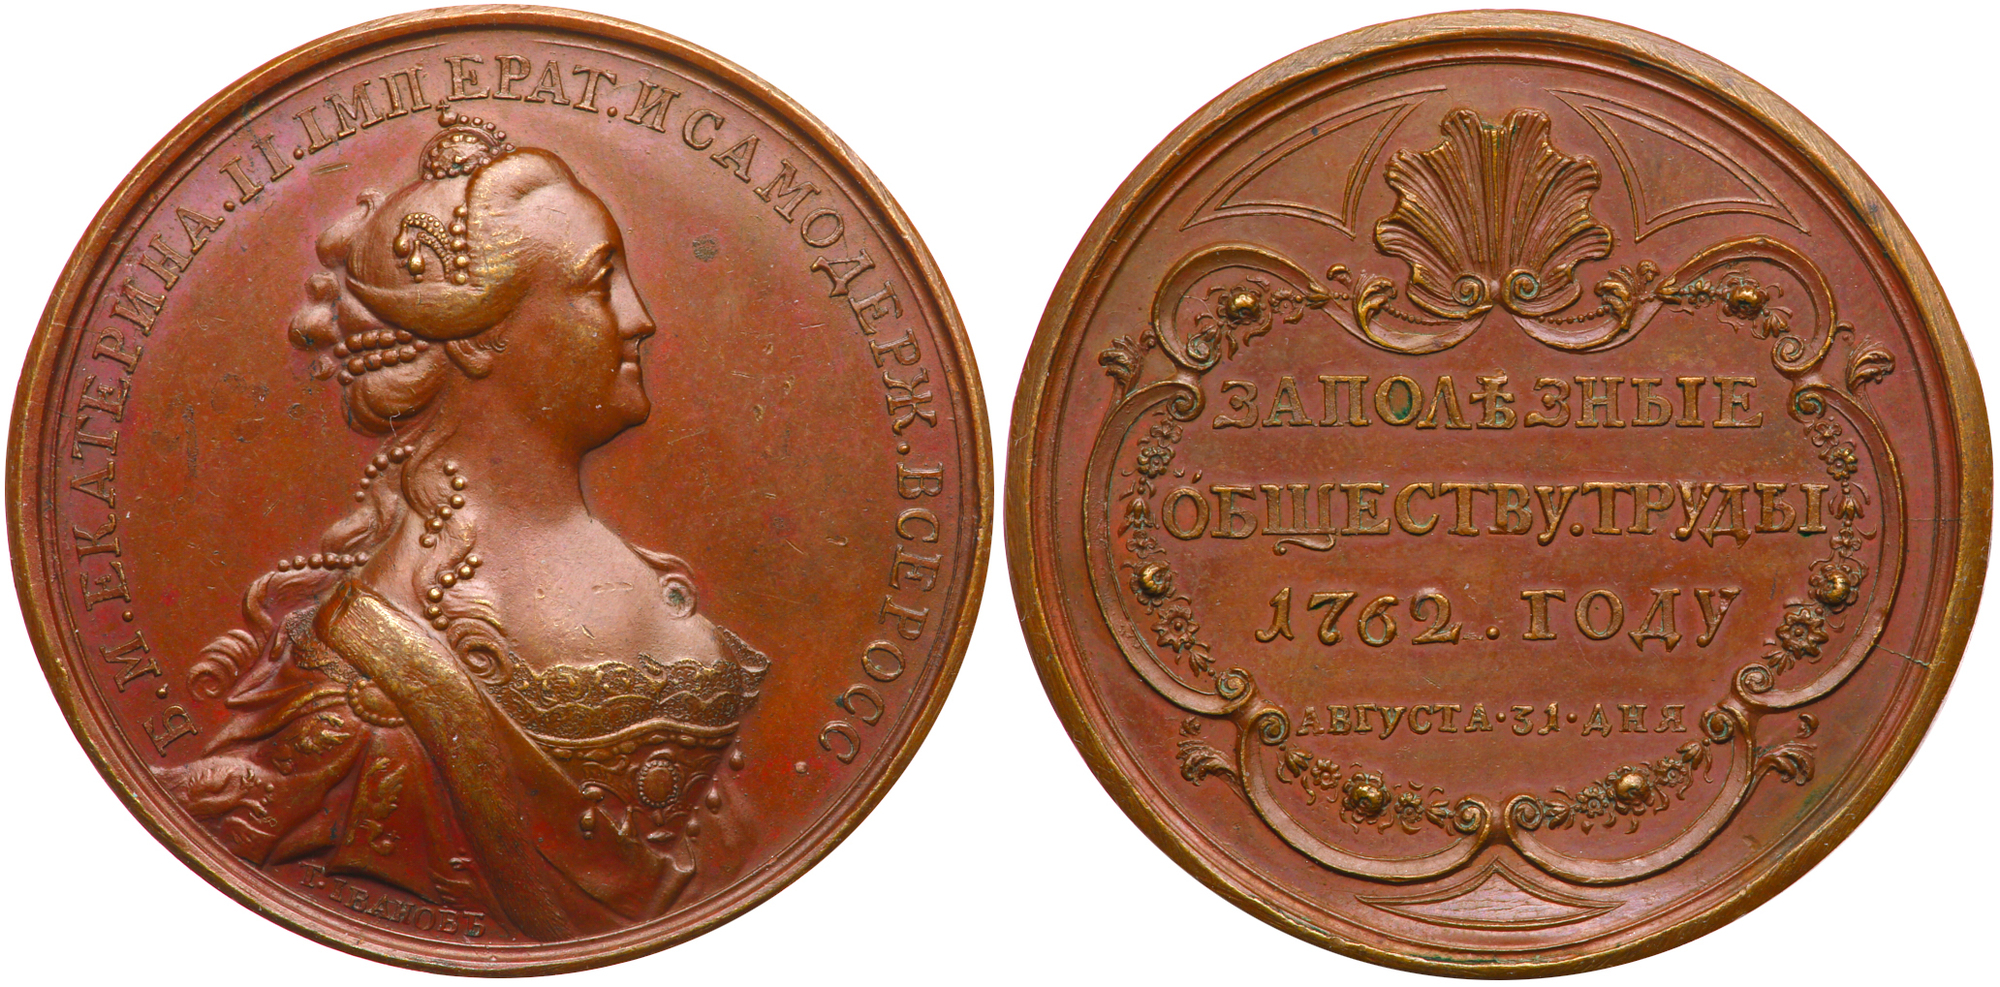 Award Medal. Bronze. 44 mm. By T. Ivanov. For Contribution to Society and Commerce, 1762. Novodel.